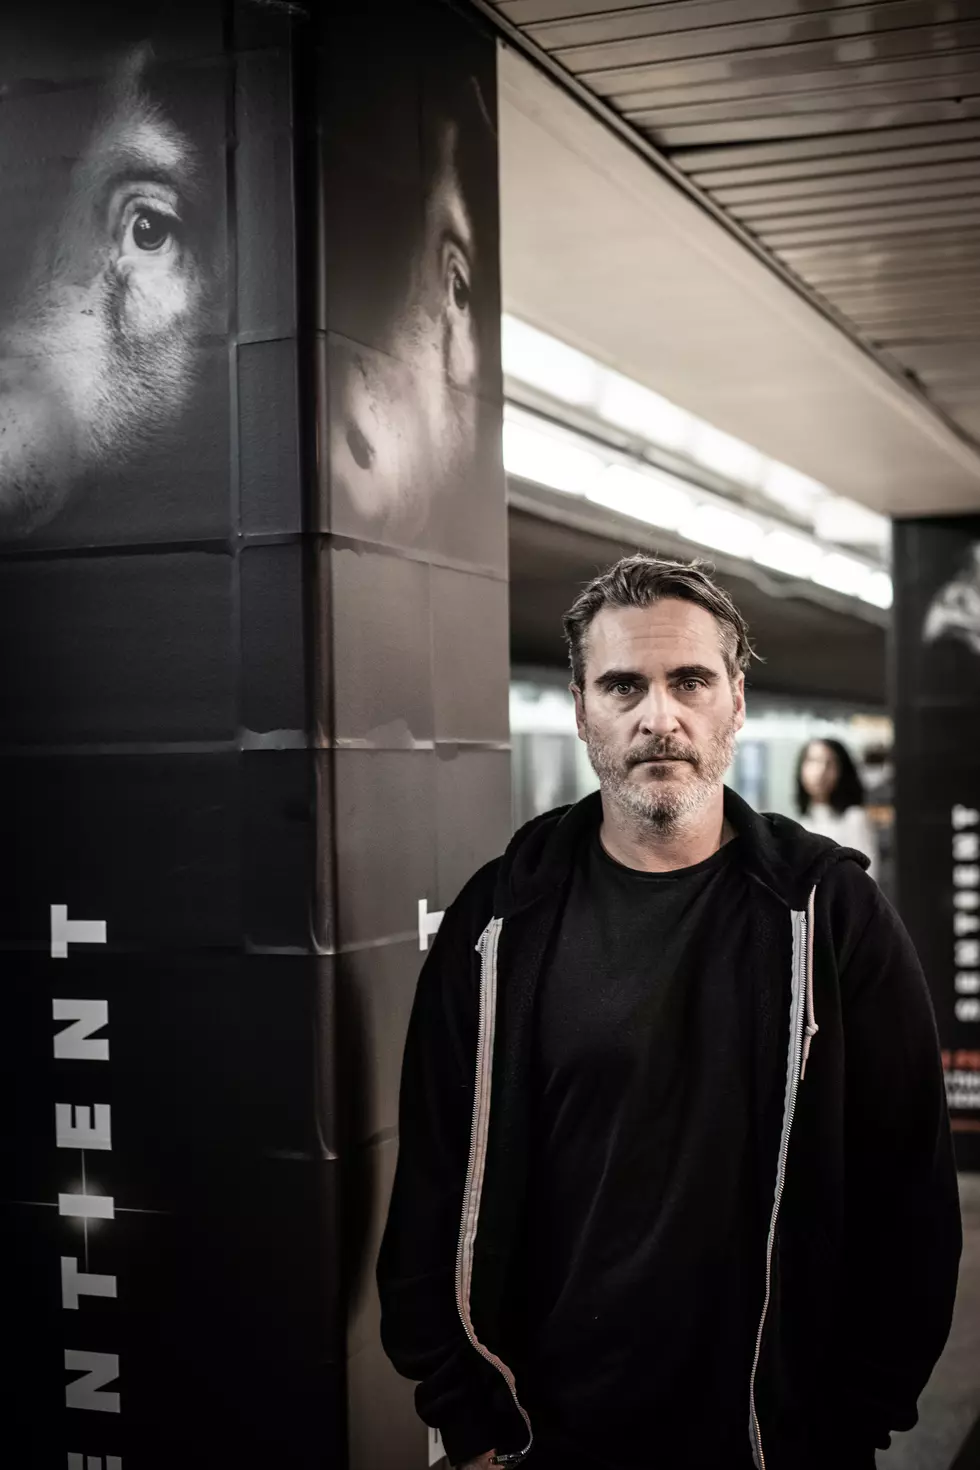 Joaquin Phoenix Writes Forward for Book to Say Be More Compassionate